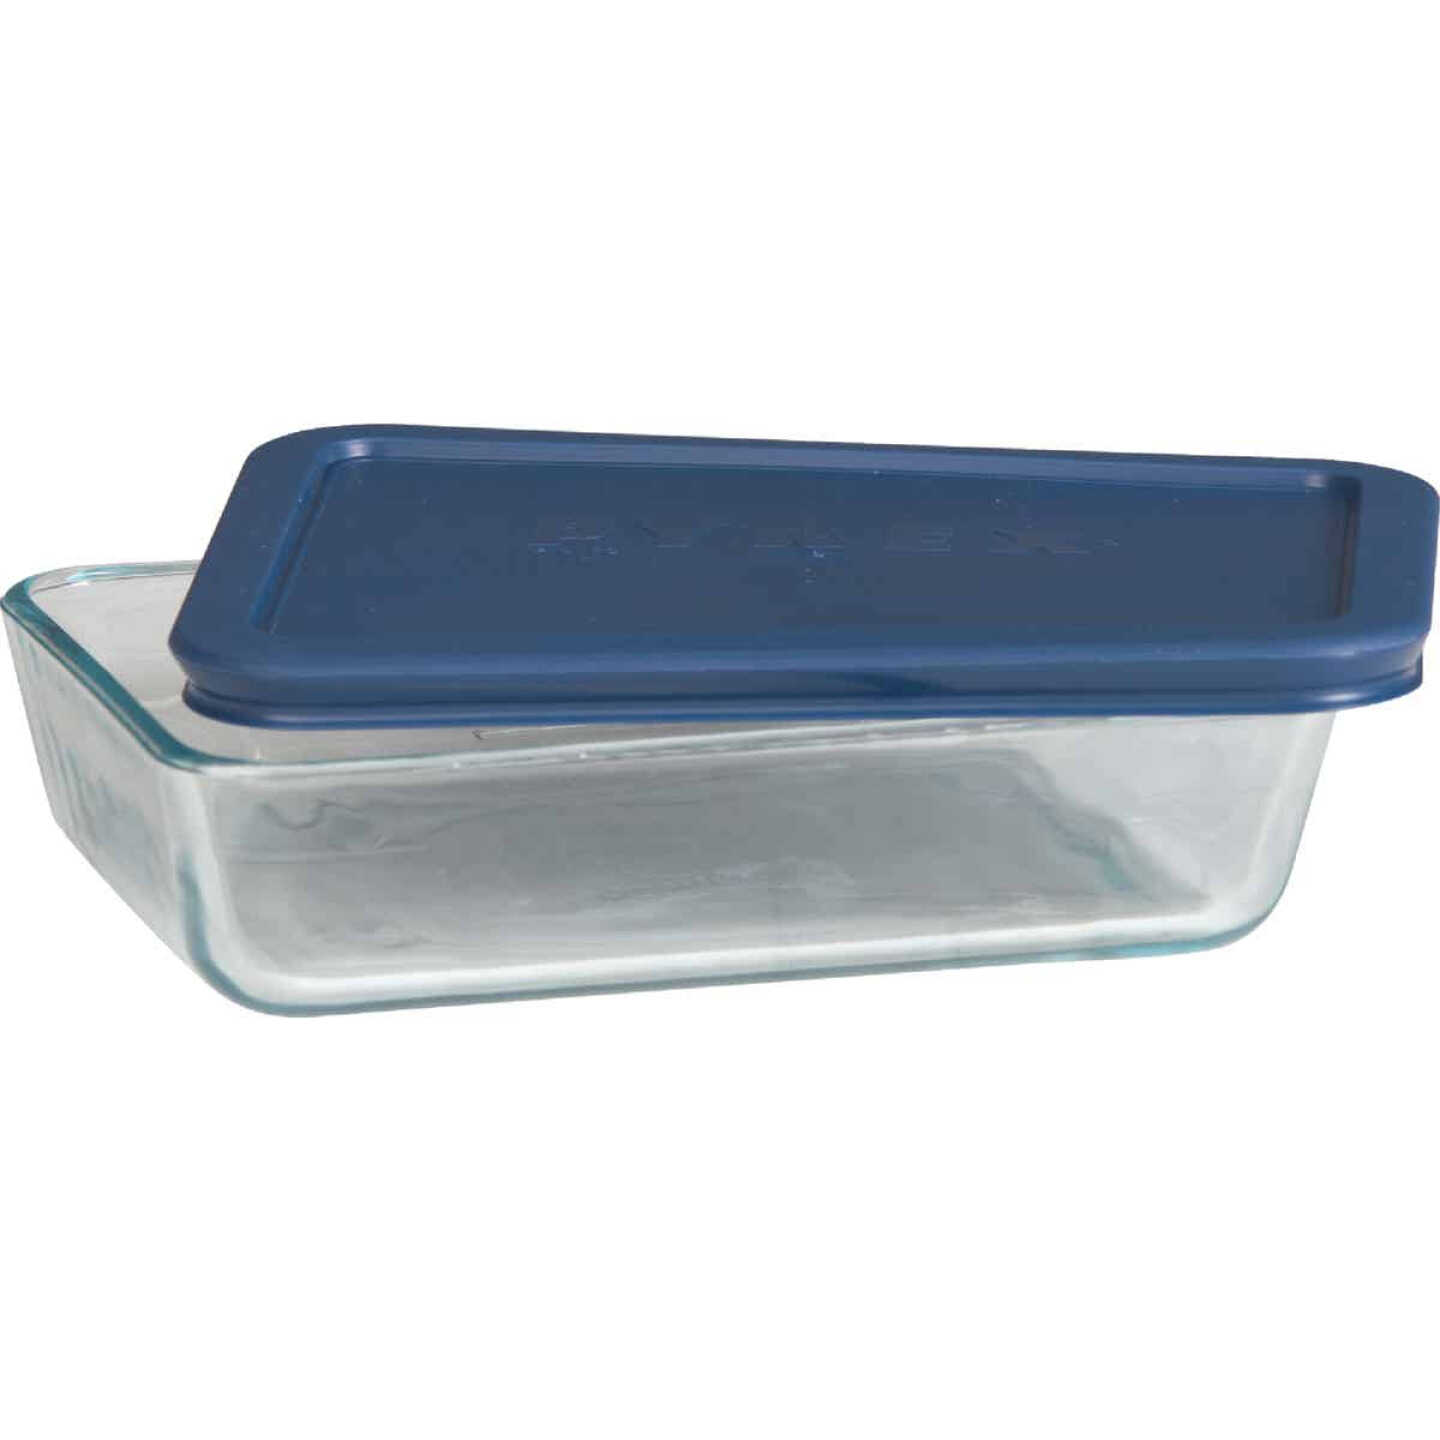 Pyrex Simply Store 7-Cup Round Glass Storage Container with Lid - Power  Townsend Company